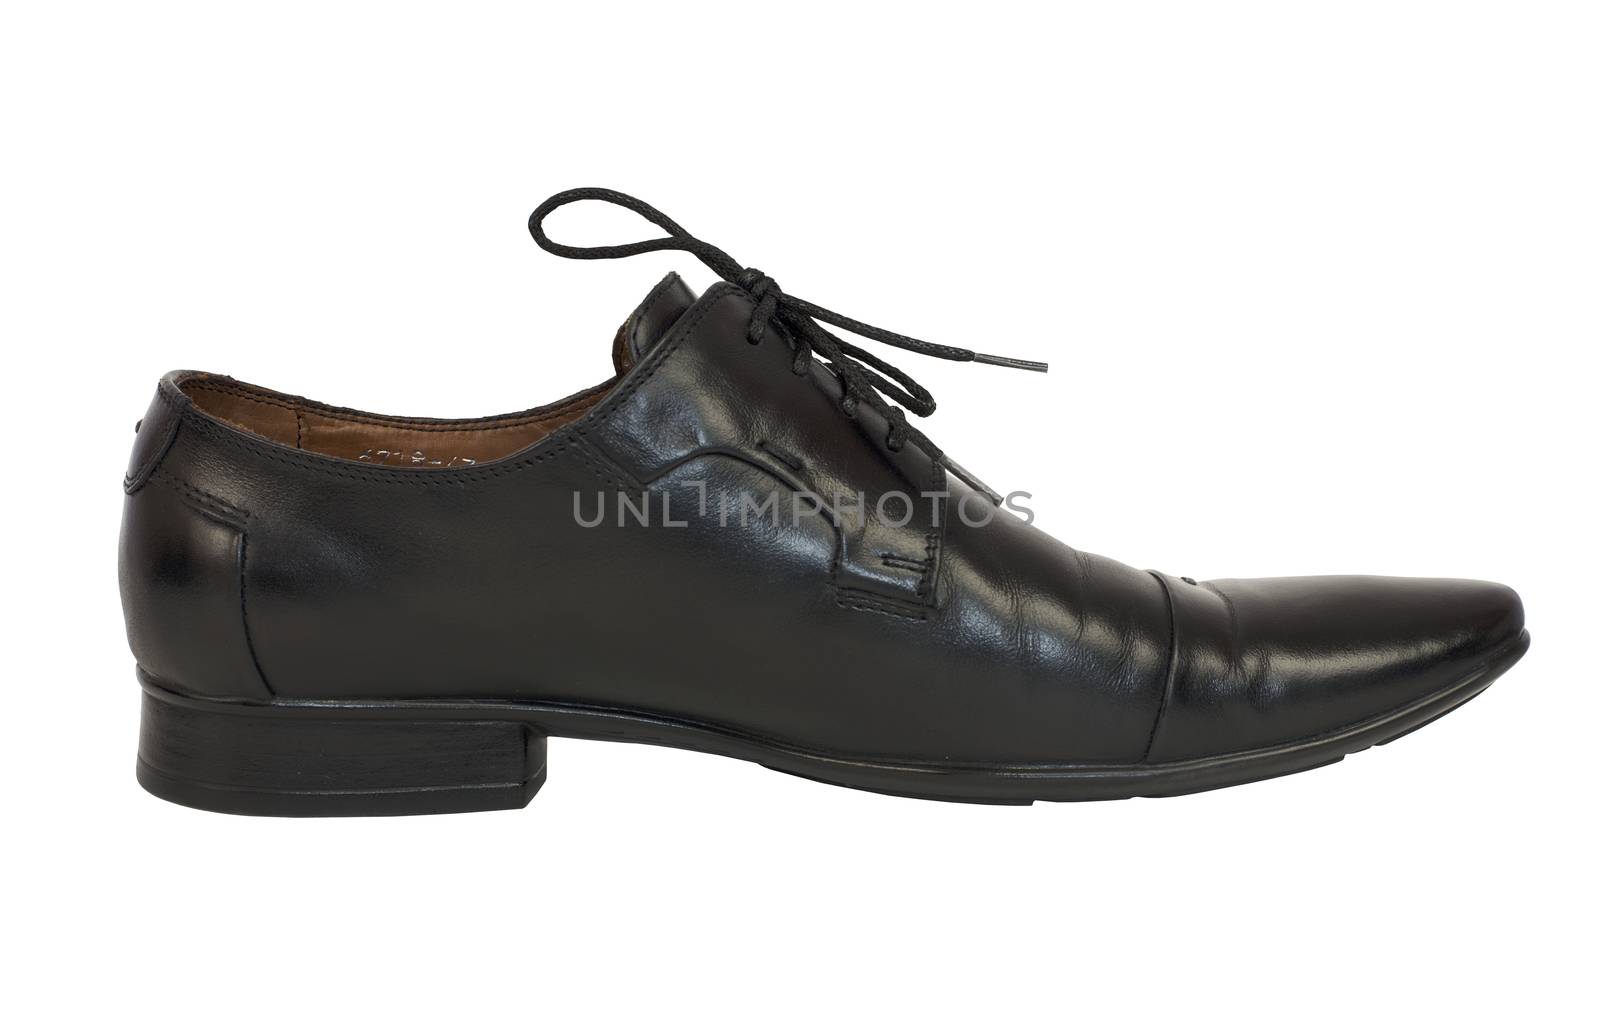 Men's shoes in classic style by cherezoff